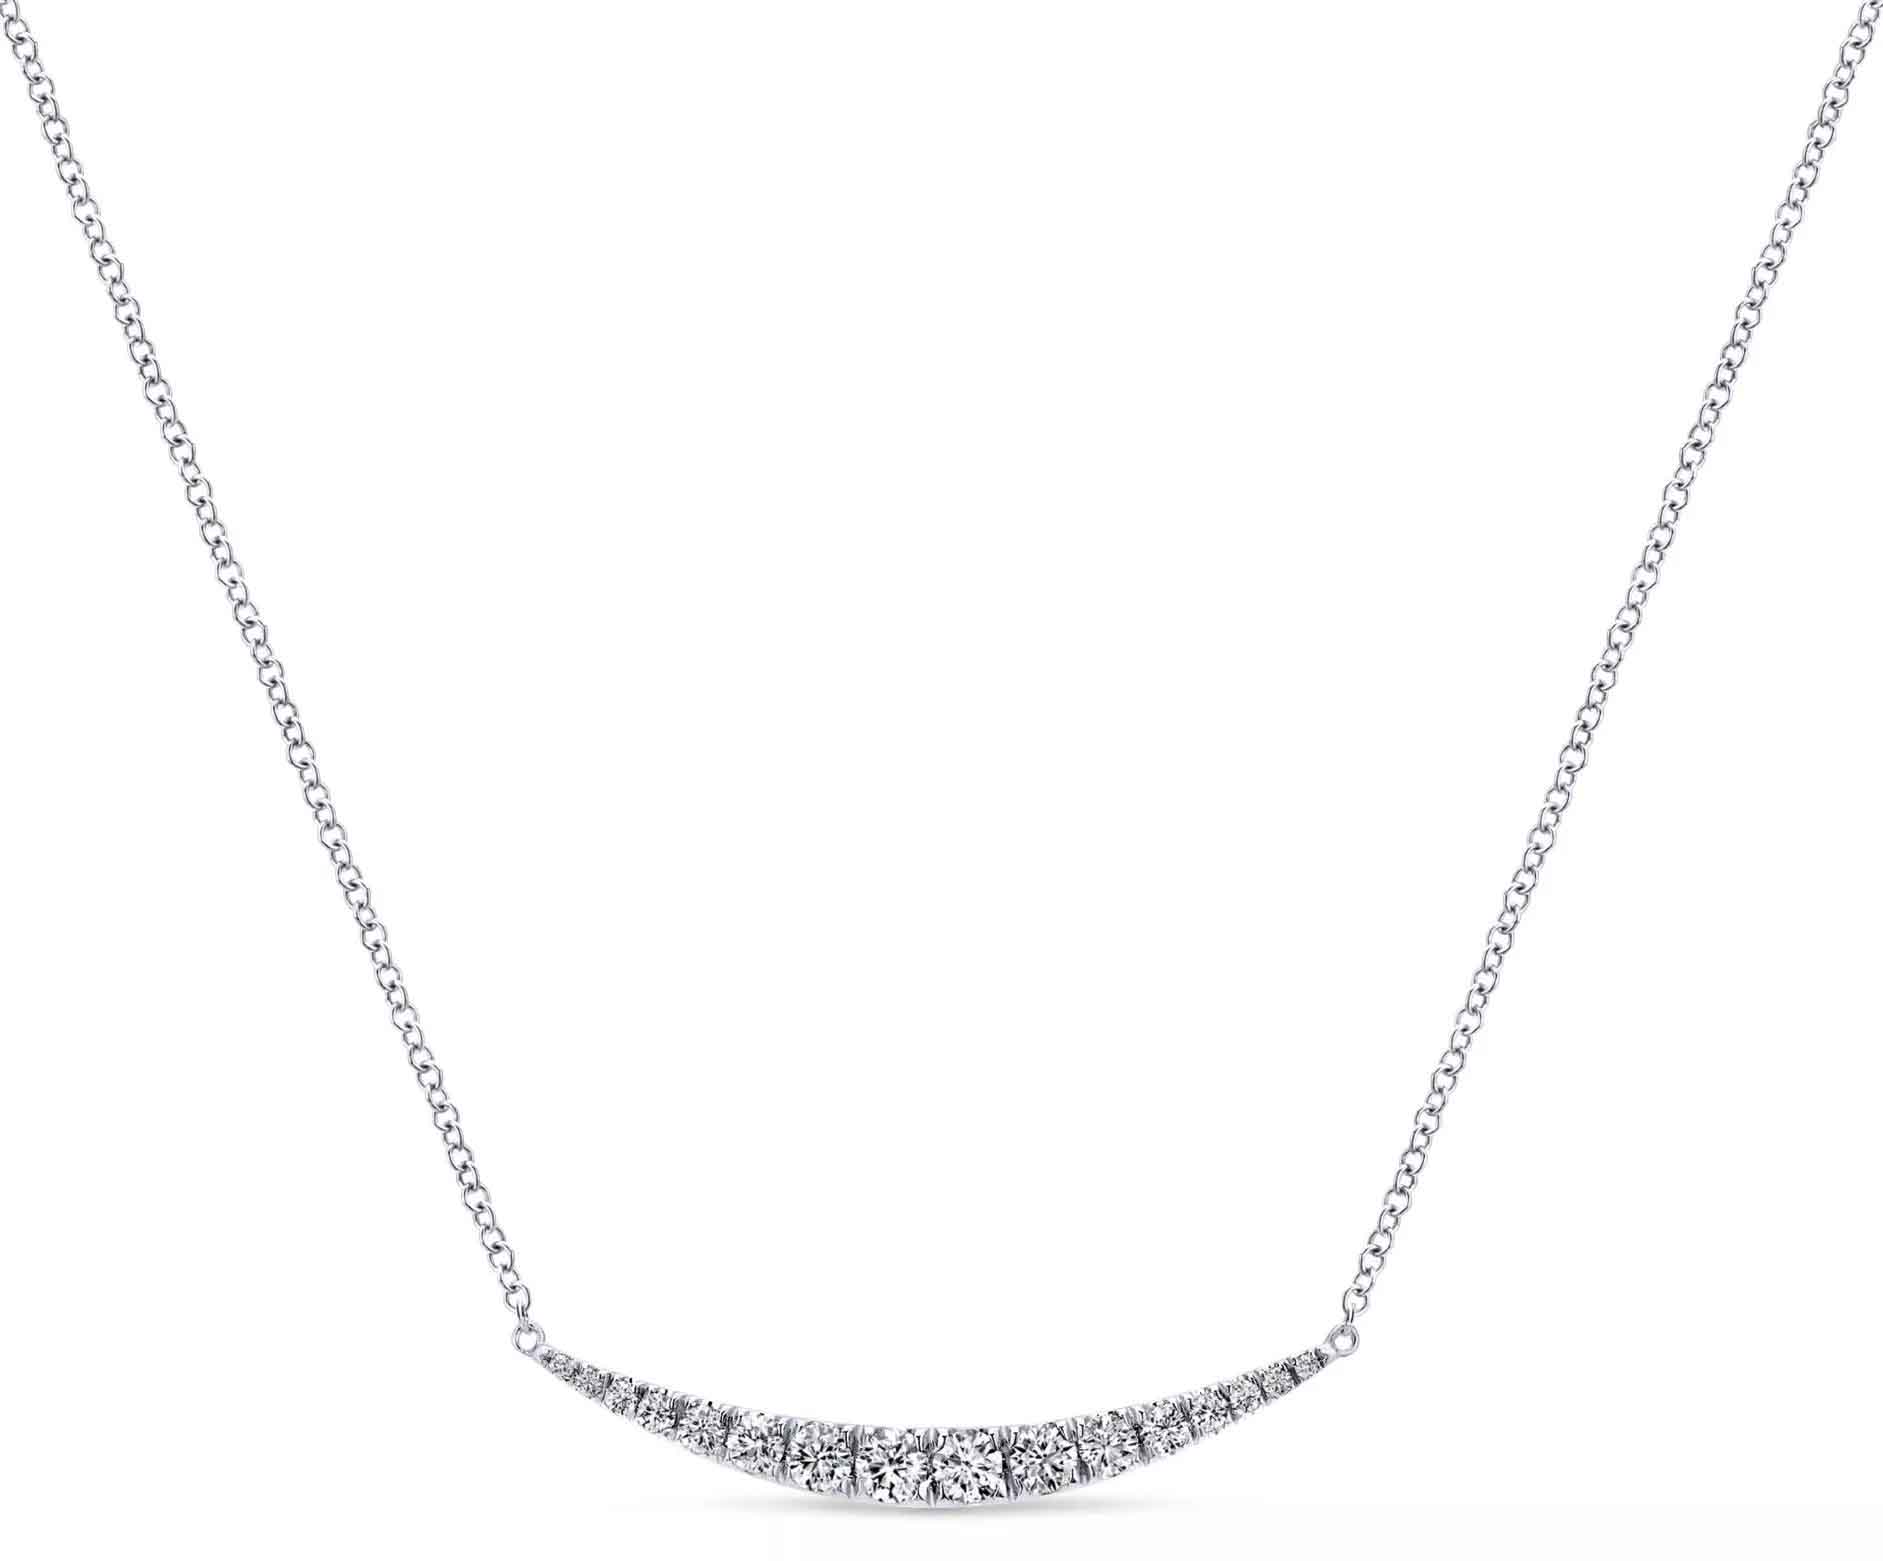 Indulgence bar necklace in 14k white gold with 0.5 ct. t.w. diamonds